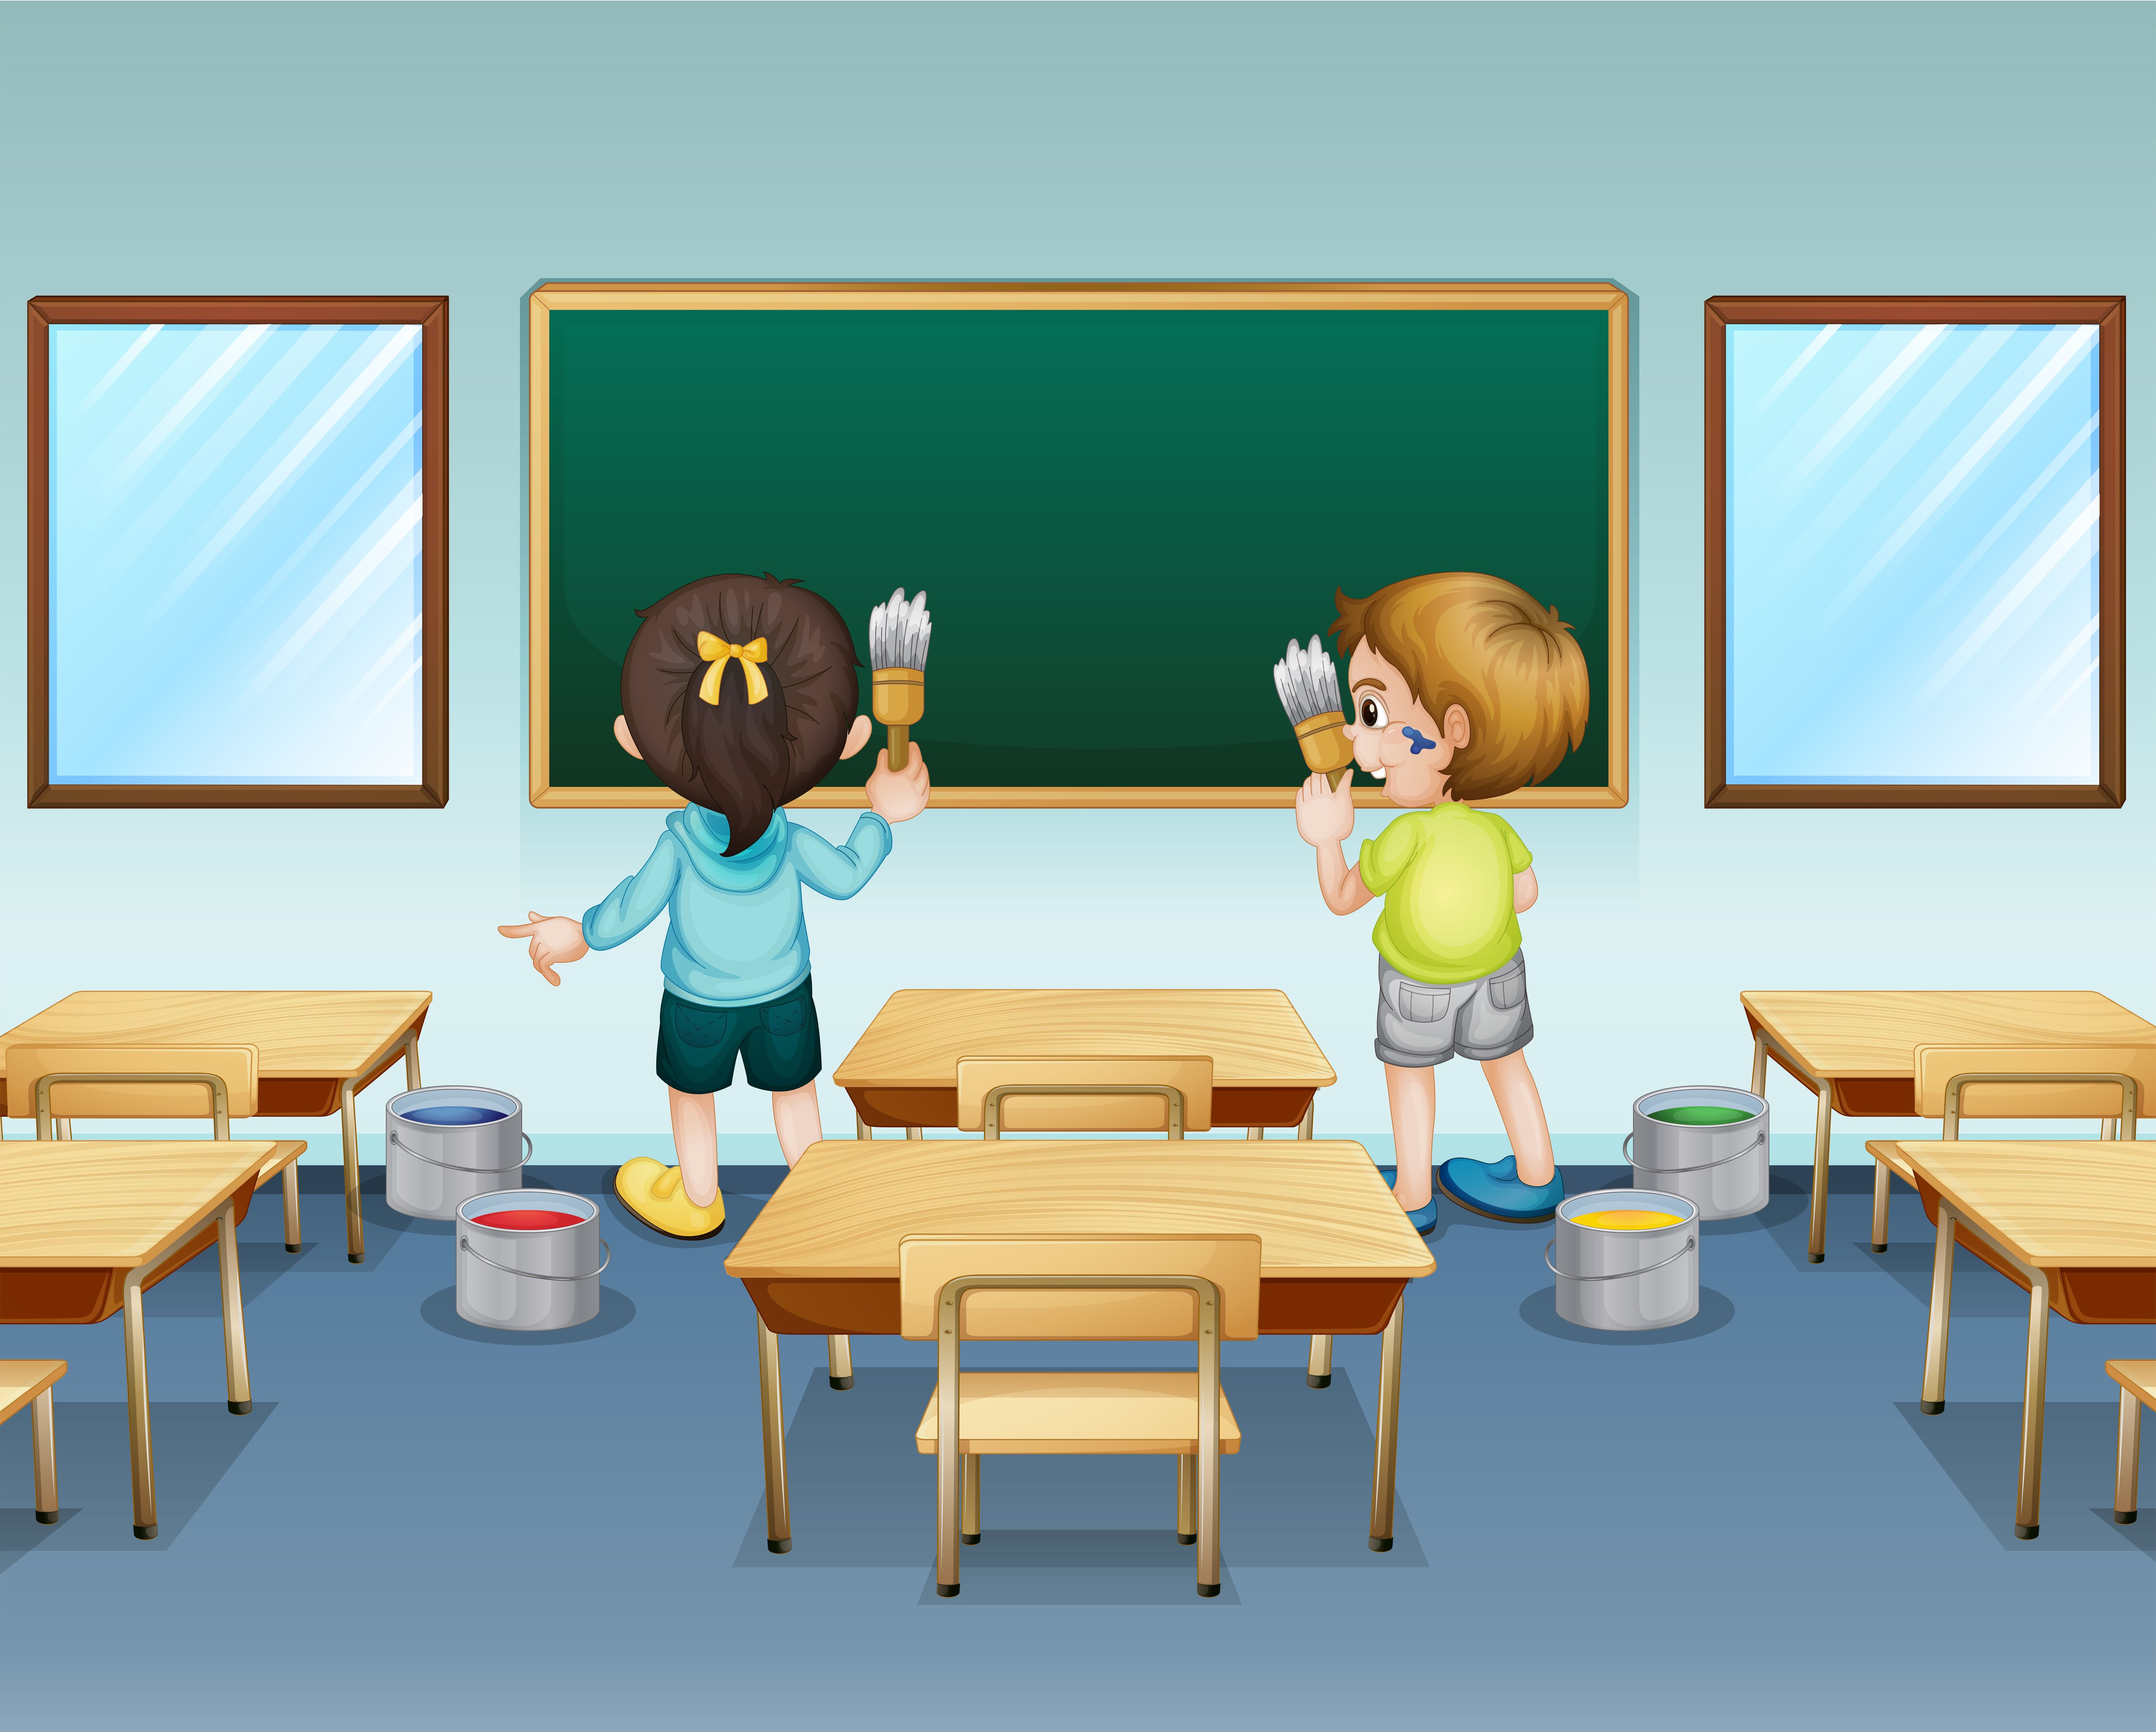 Students Cleaning Classroom Together Stock Illustration - Download ...